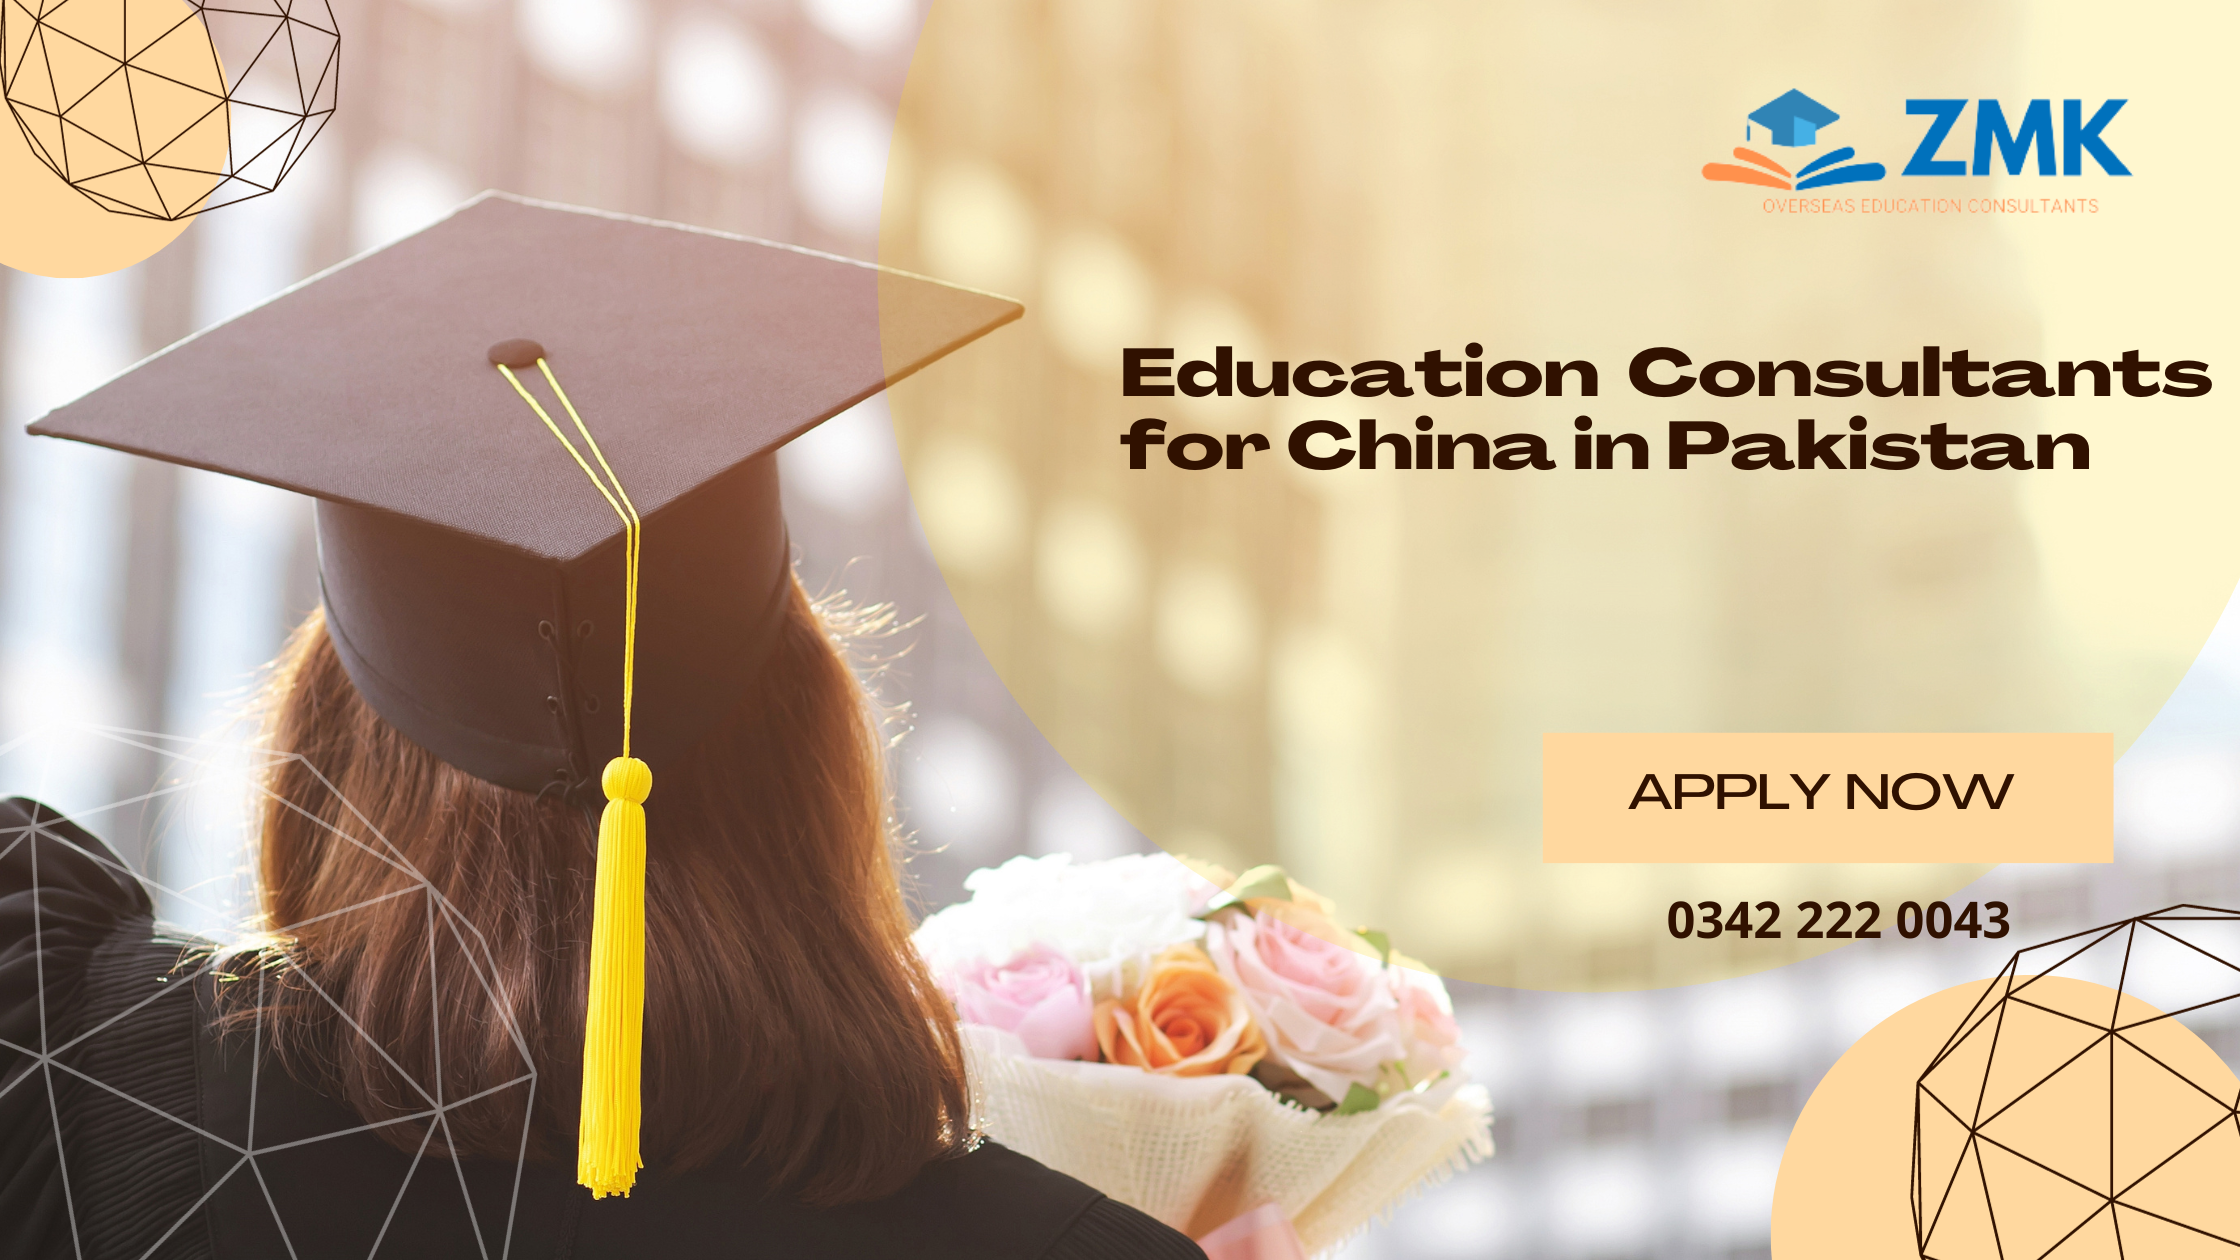 Education Consultants for China in Pakistan